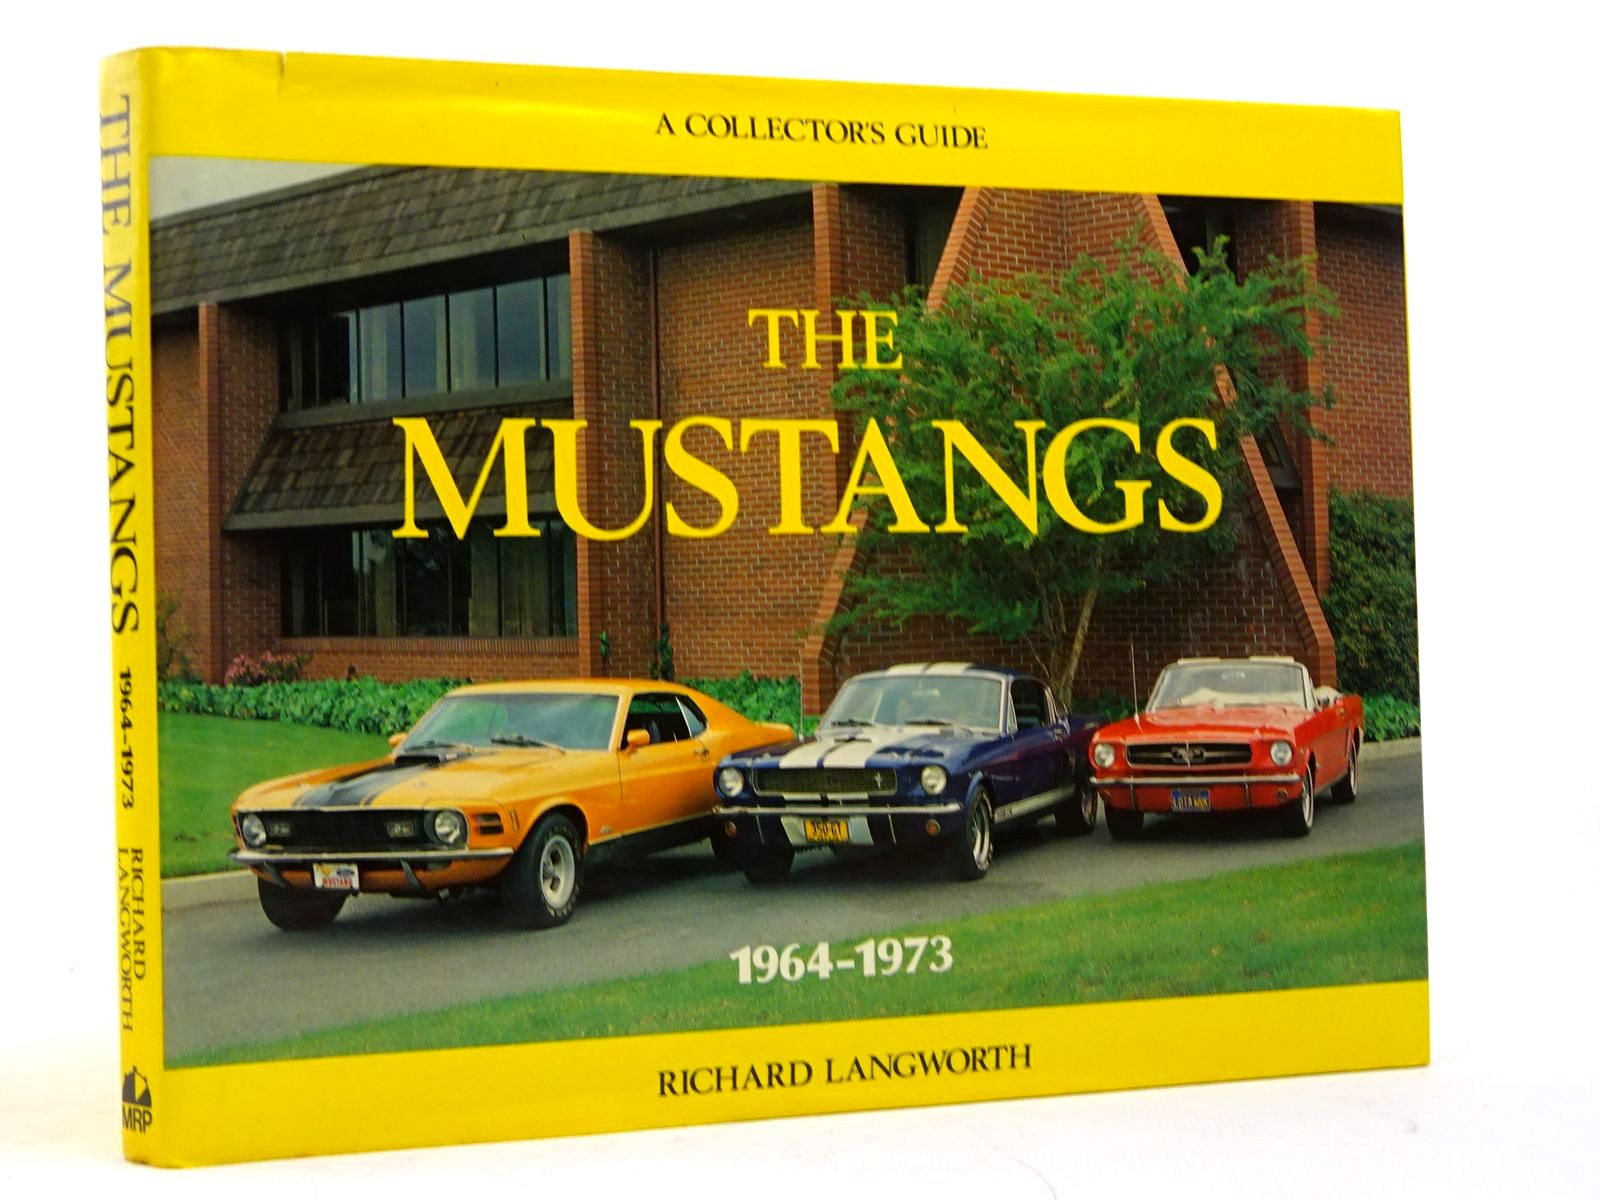 Photo of THE MUSTANGS 1964-1973 (A COLLECTOR'S GUIDE) written by Langworth, Richard published by Motor Racing Publications Ltd. (STOCK CODE: 1817966)  for sale by Stella & Rose's Books